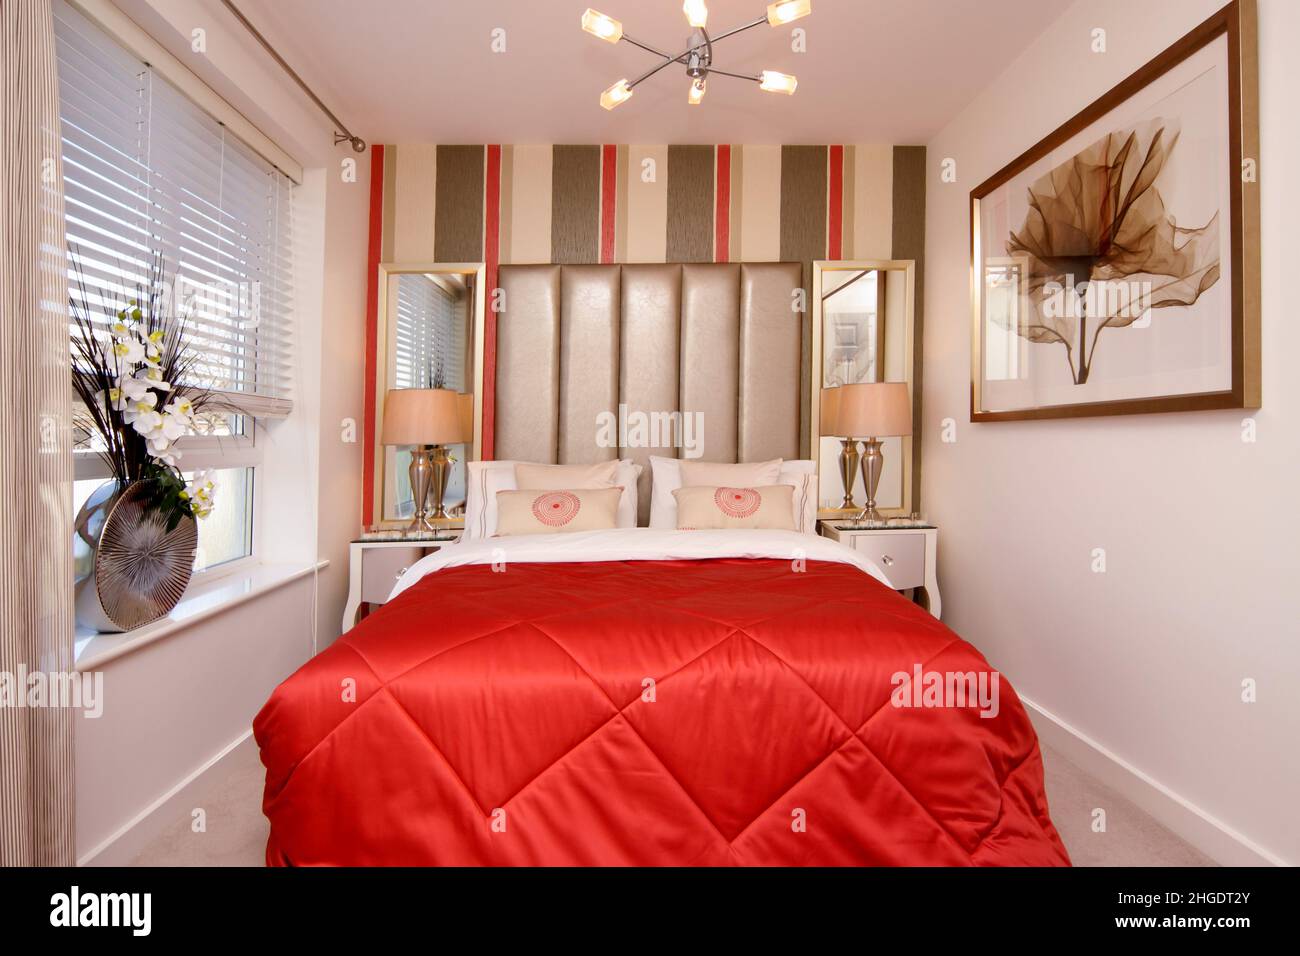 Dramatic bedroom, red bedspread,striped feature wall, gold headboard,double bed,narrow room space,small space living, Stock Photo